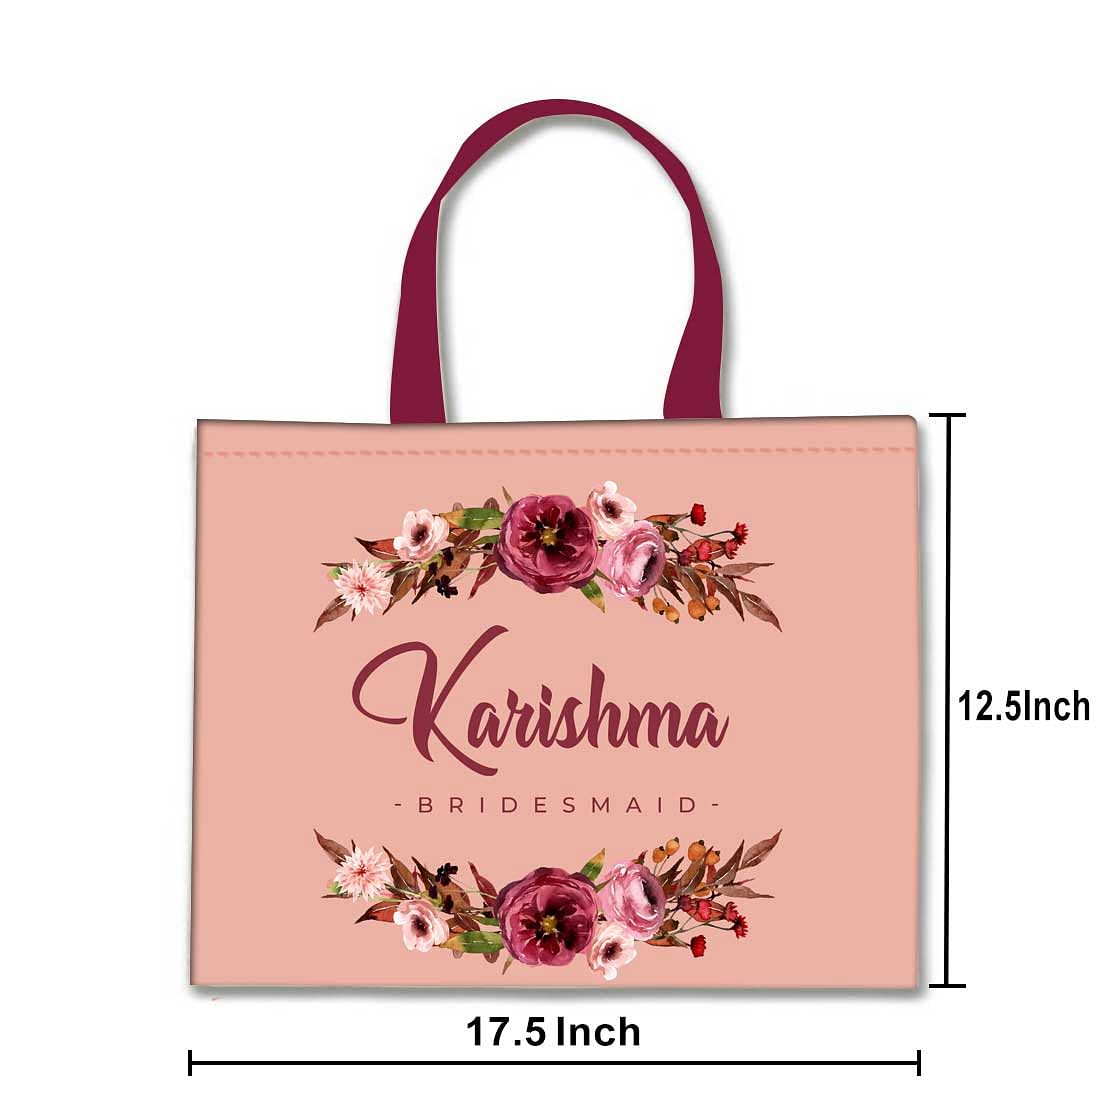 Nutcase Personalized Tote Bag for Women Gym Beach Travel Shopping Fashion Bags with Zip Closure and Internal Pocket to keep cash/valuables - Bridesmaid Nutcase